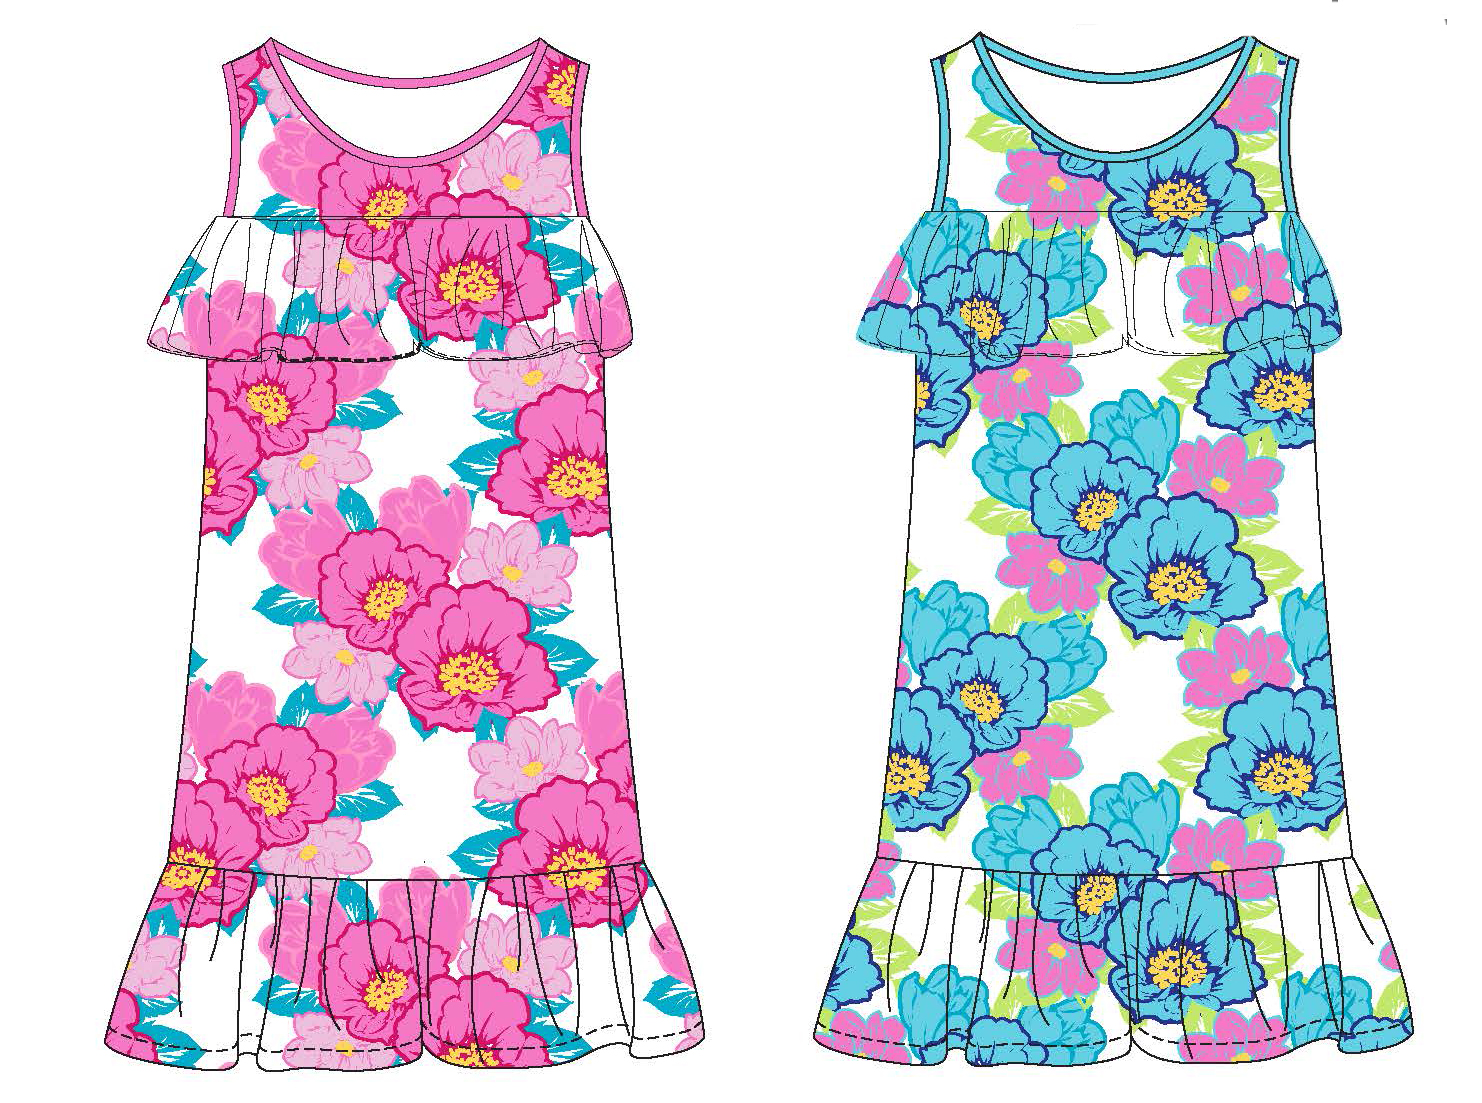 Girl's Sleeveless Knit Swing Dress w/ Hibiscus Floral Print - Size 4-6X